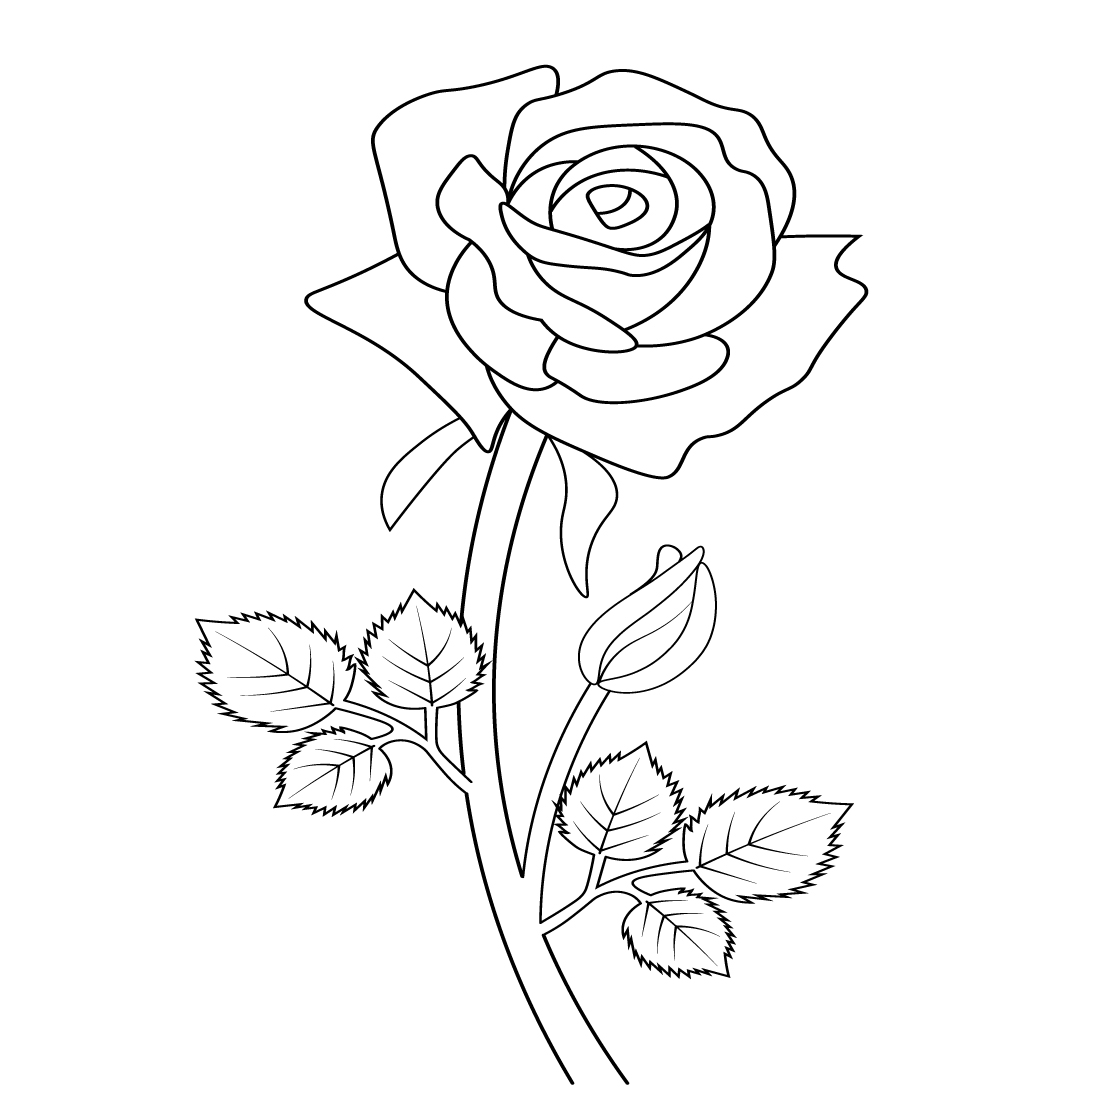 How to Draw a Rose: Learn to Draw Rose Pencil Drawings — Art is Fun